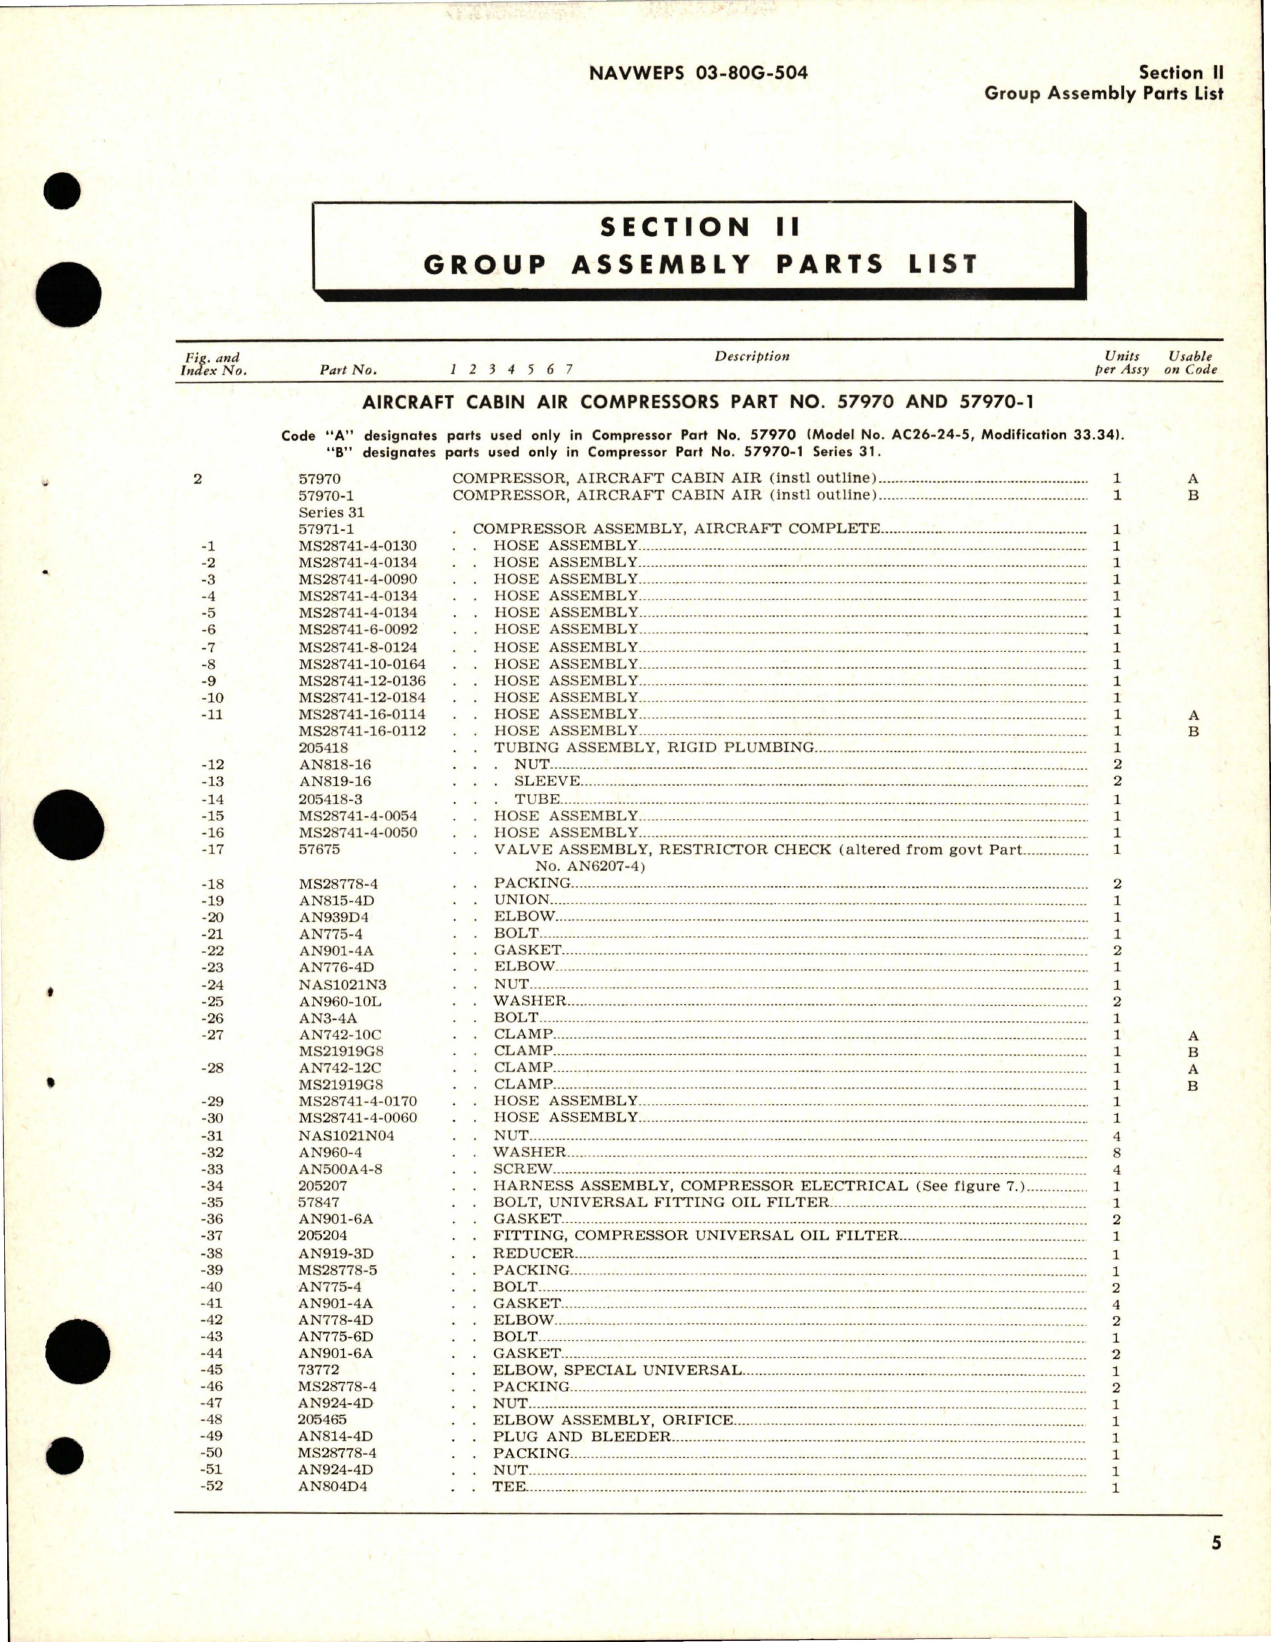 Sample page 9 from AirCorps Library document: Illustrated Parts Breakdown for Cabin Air Compressors - Parts 57970 and 57970-1